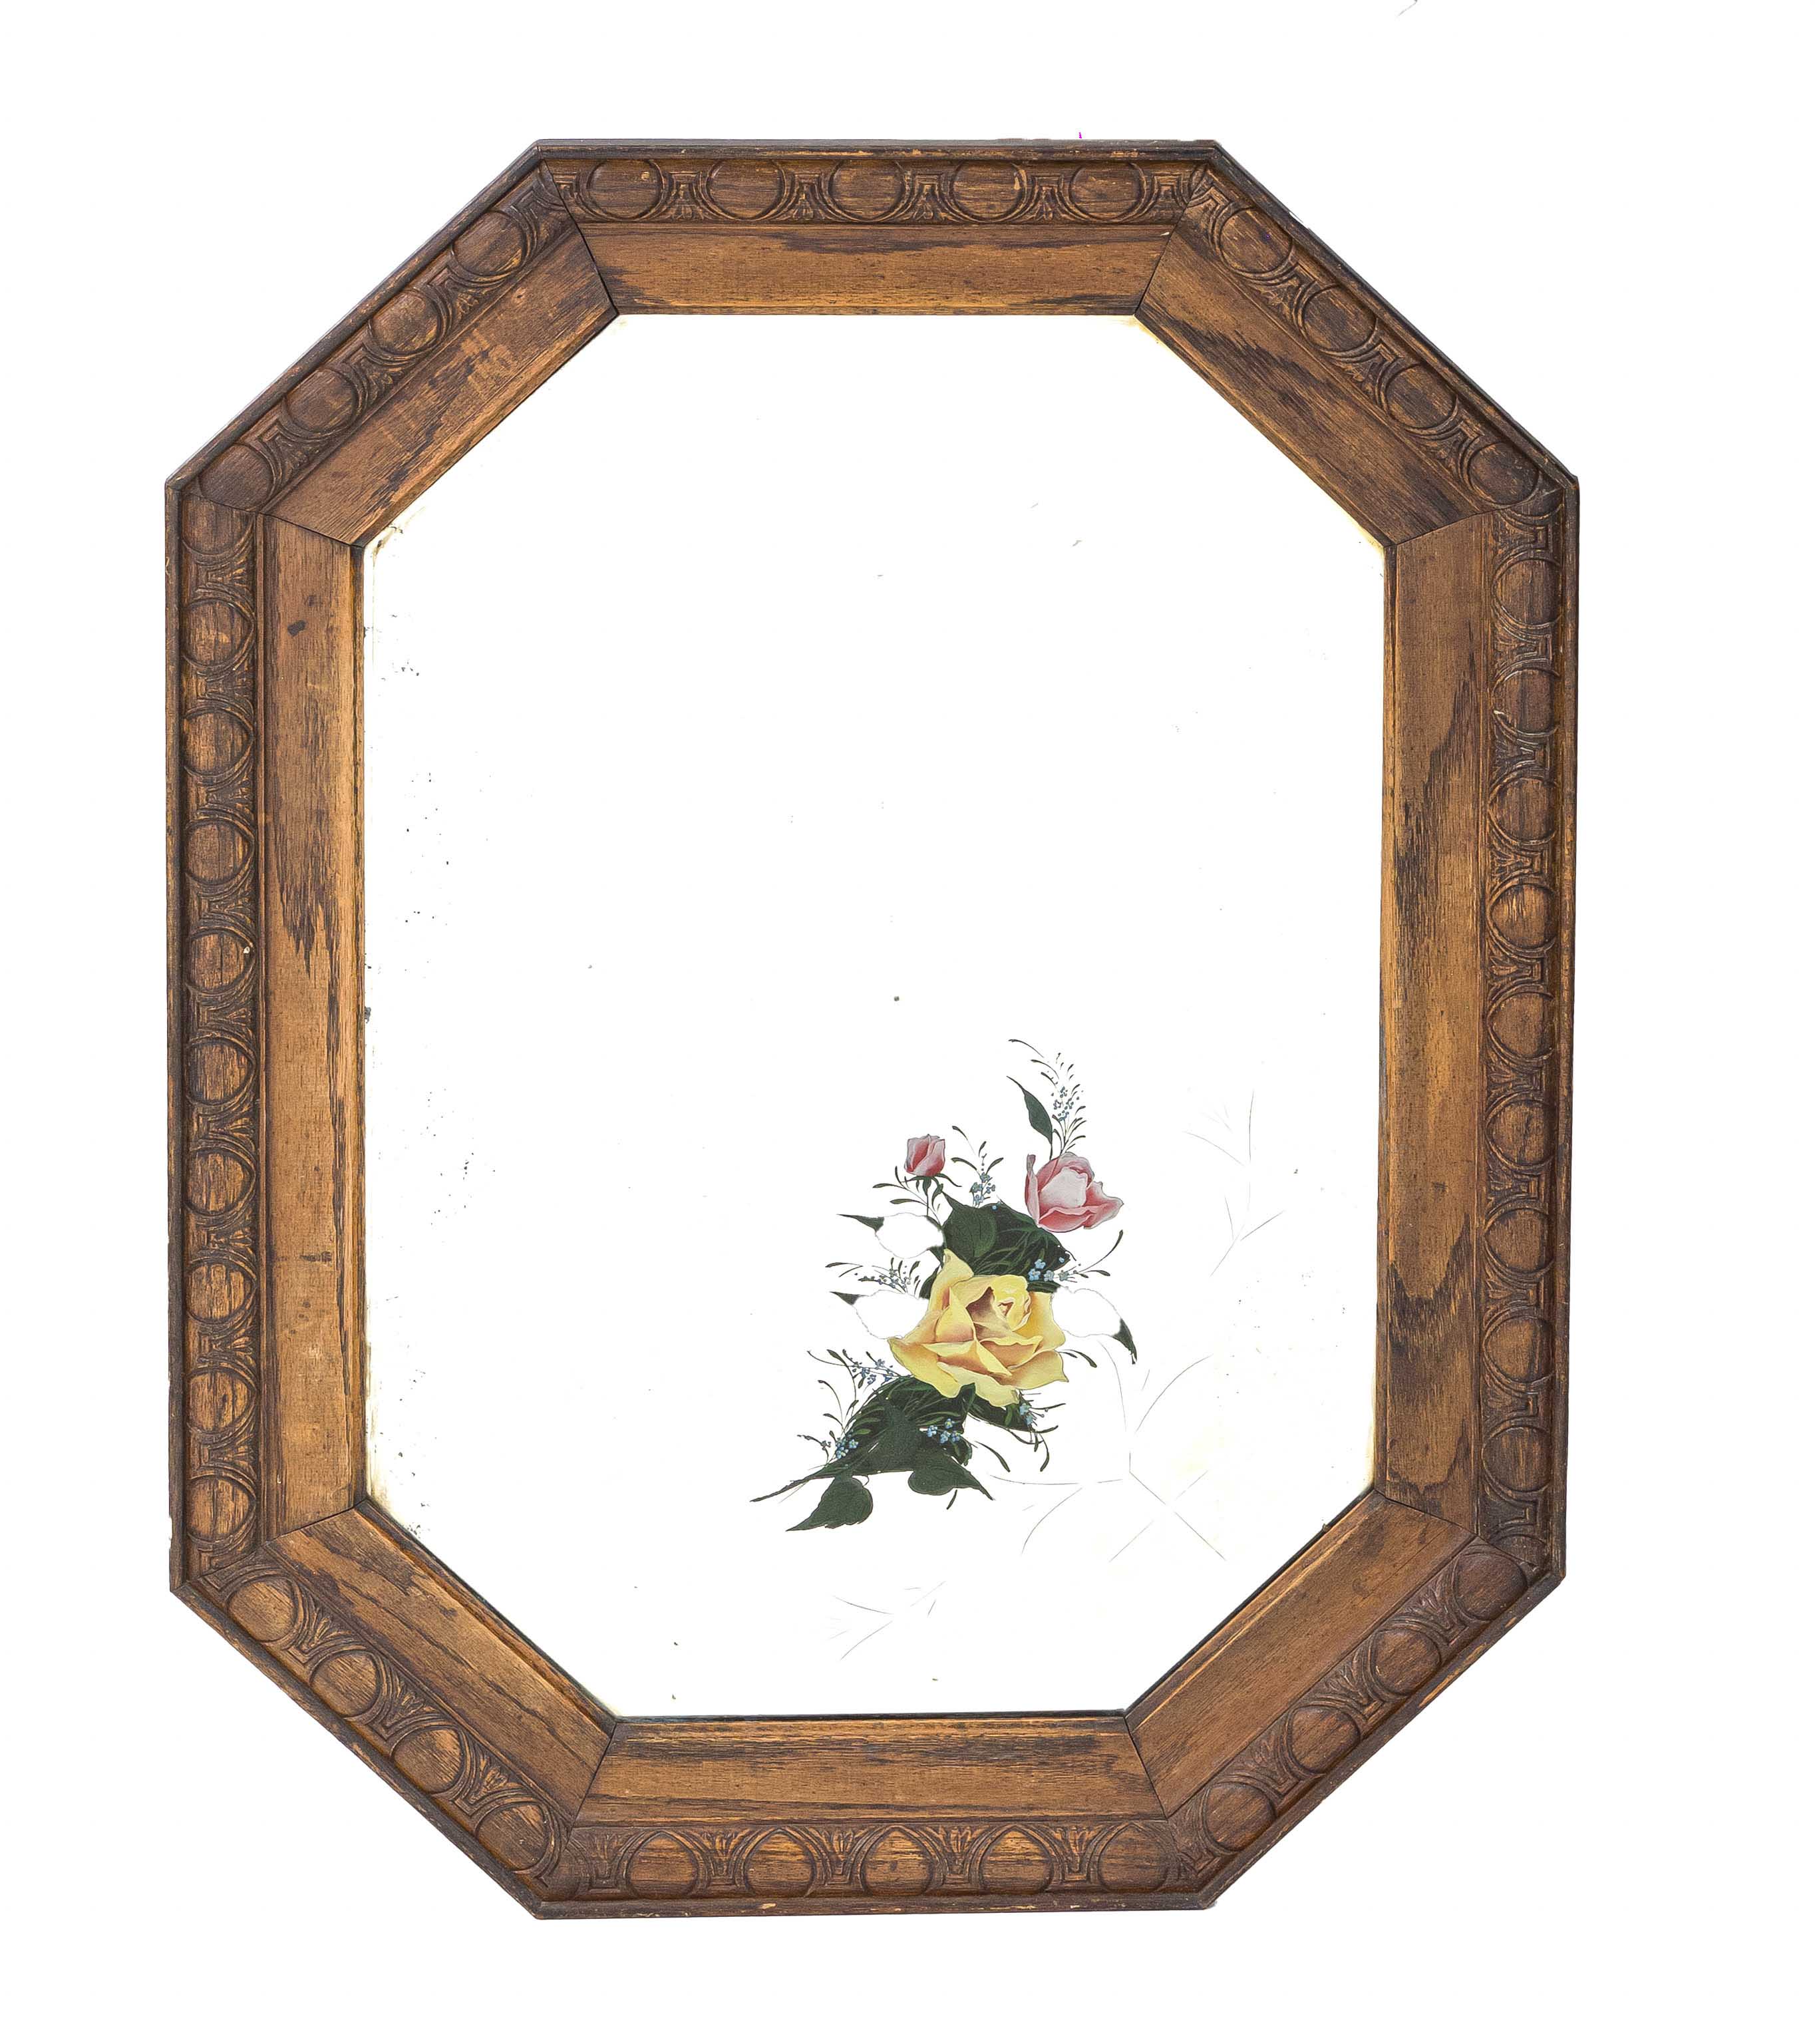 Wall mirror around 1900, oak, faceted mirror with floral cut, 95 x 70 cm